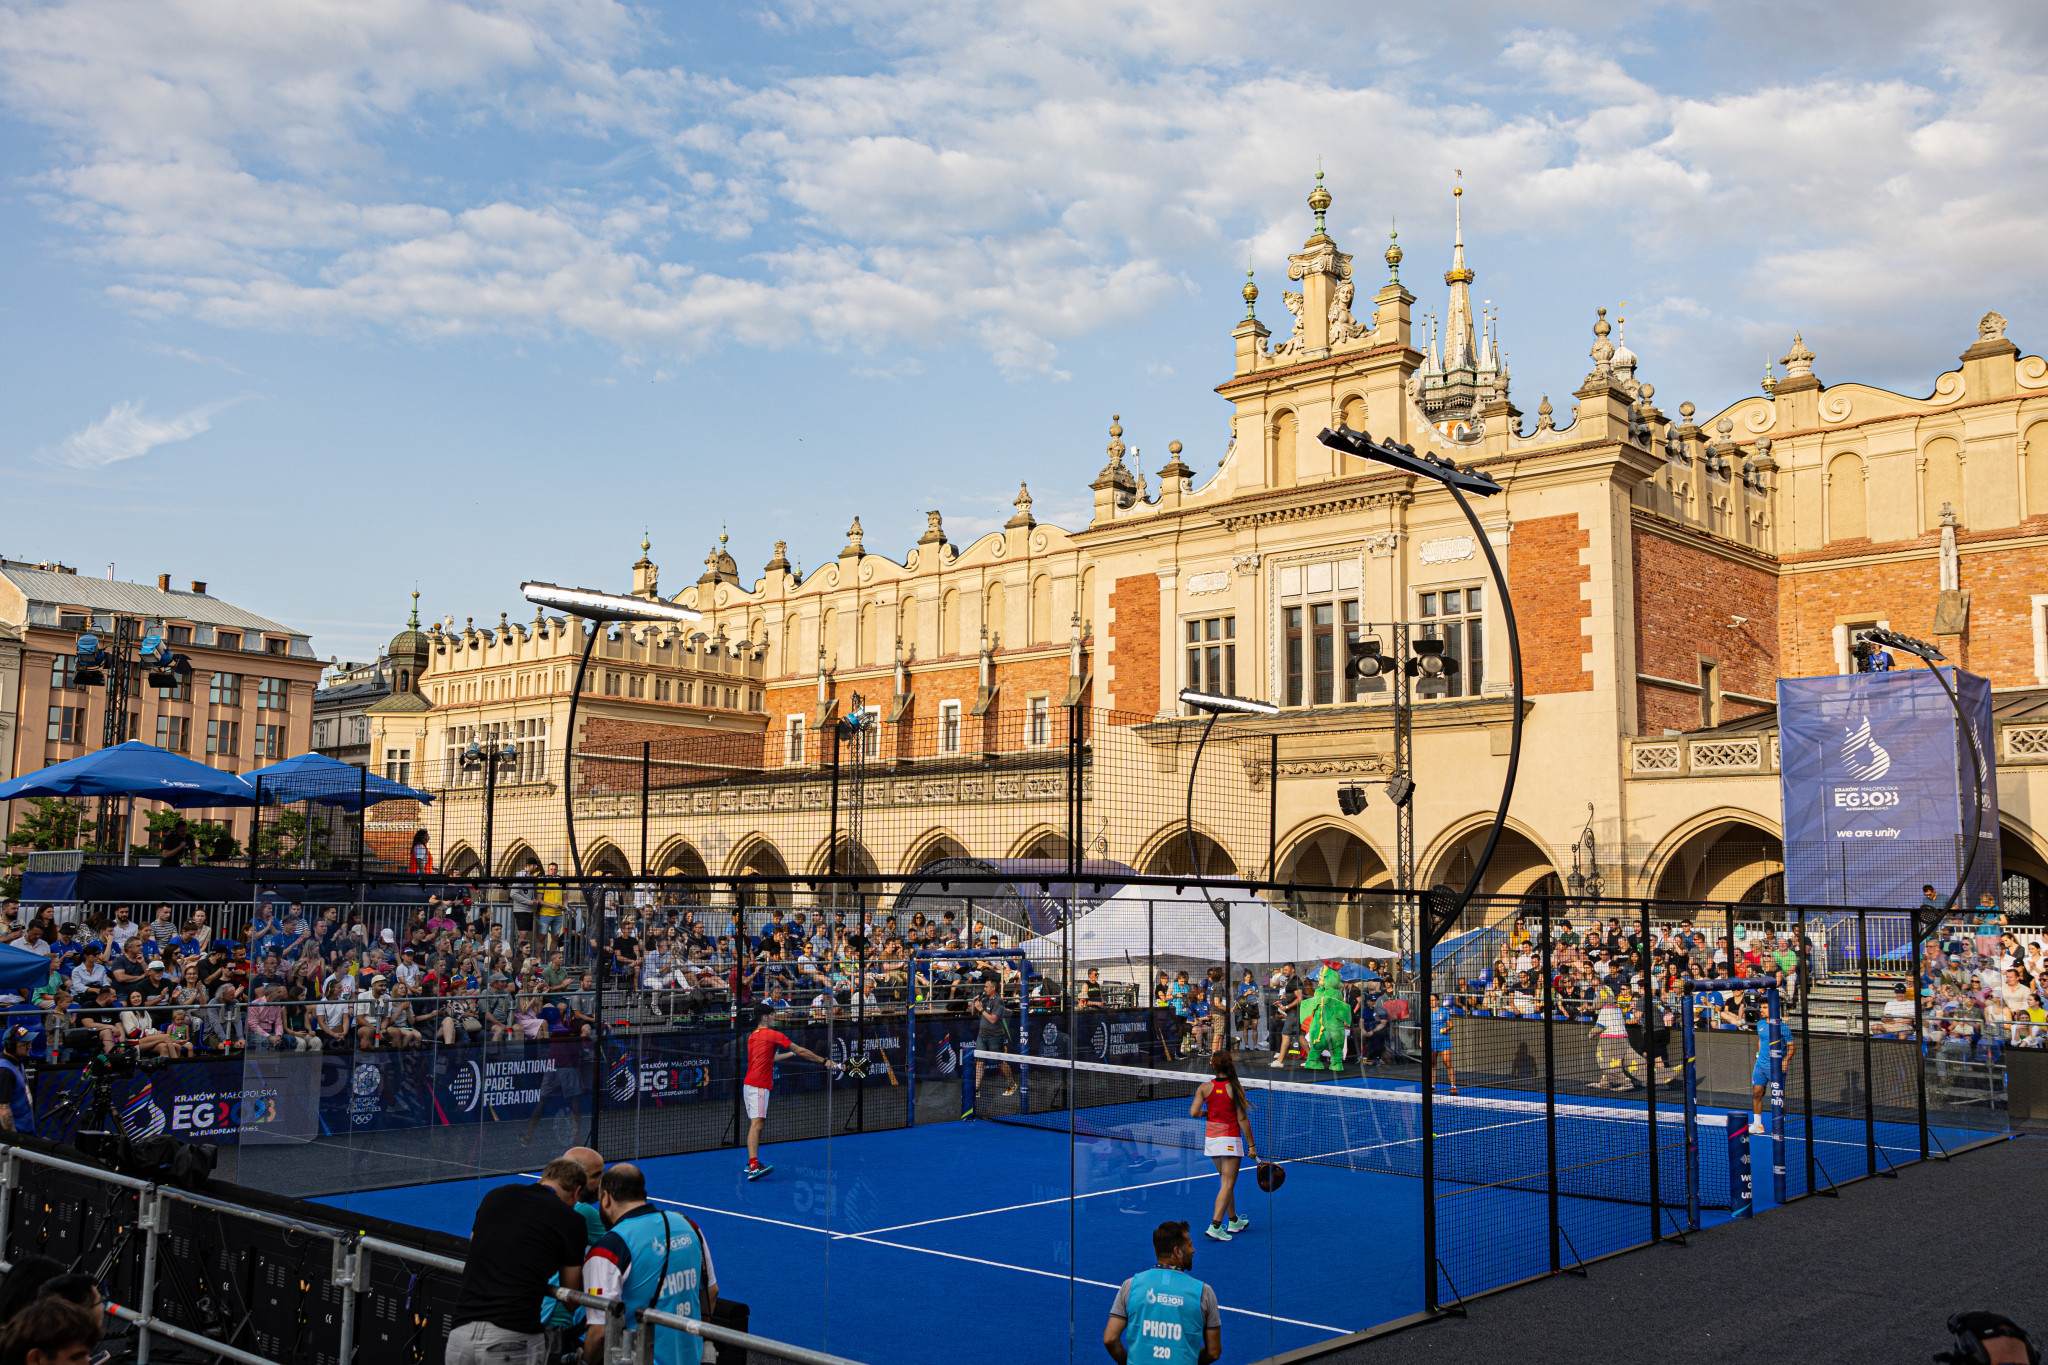 Padel in Kraków's Main Square has been among the highlights of the European Games, and Spyros Capralos said the EOC is happy to 